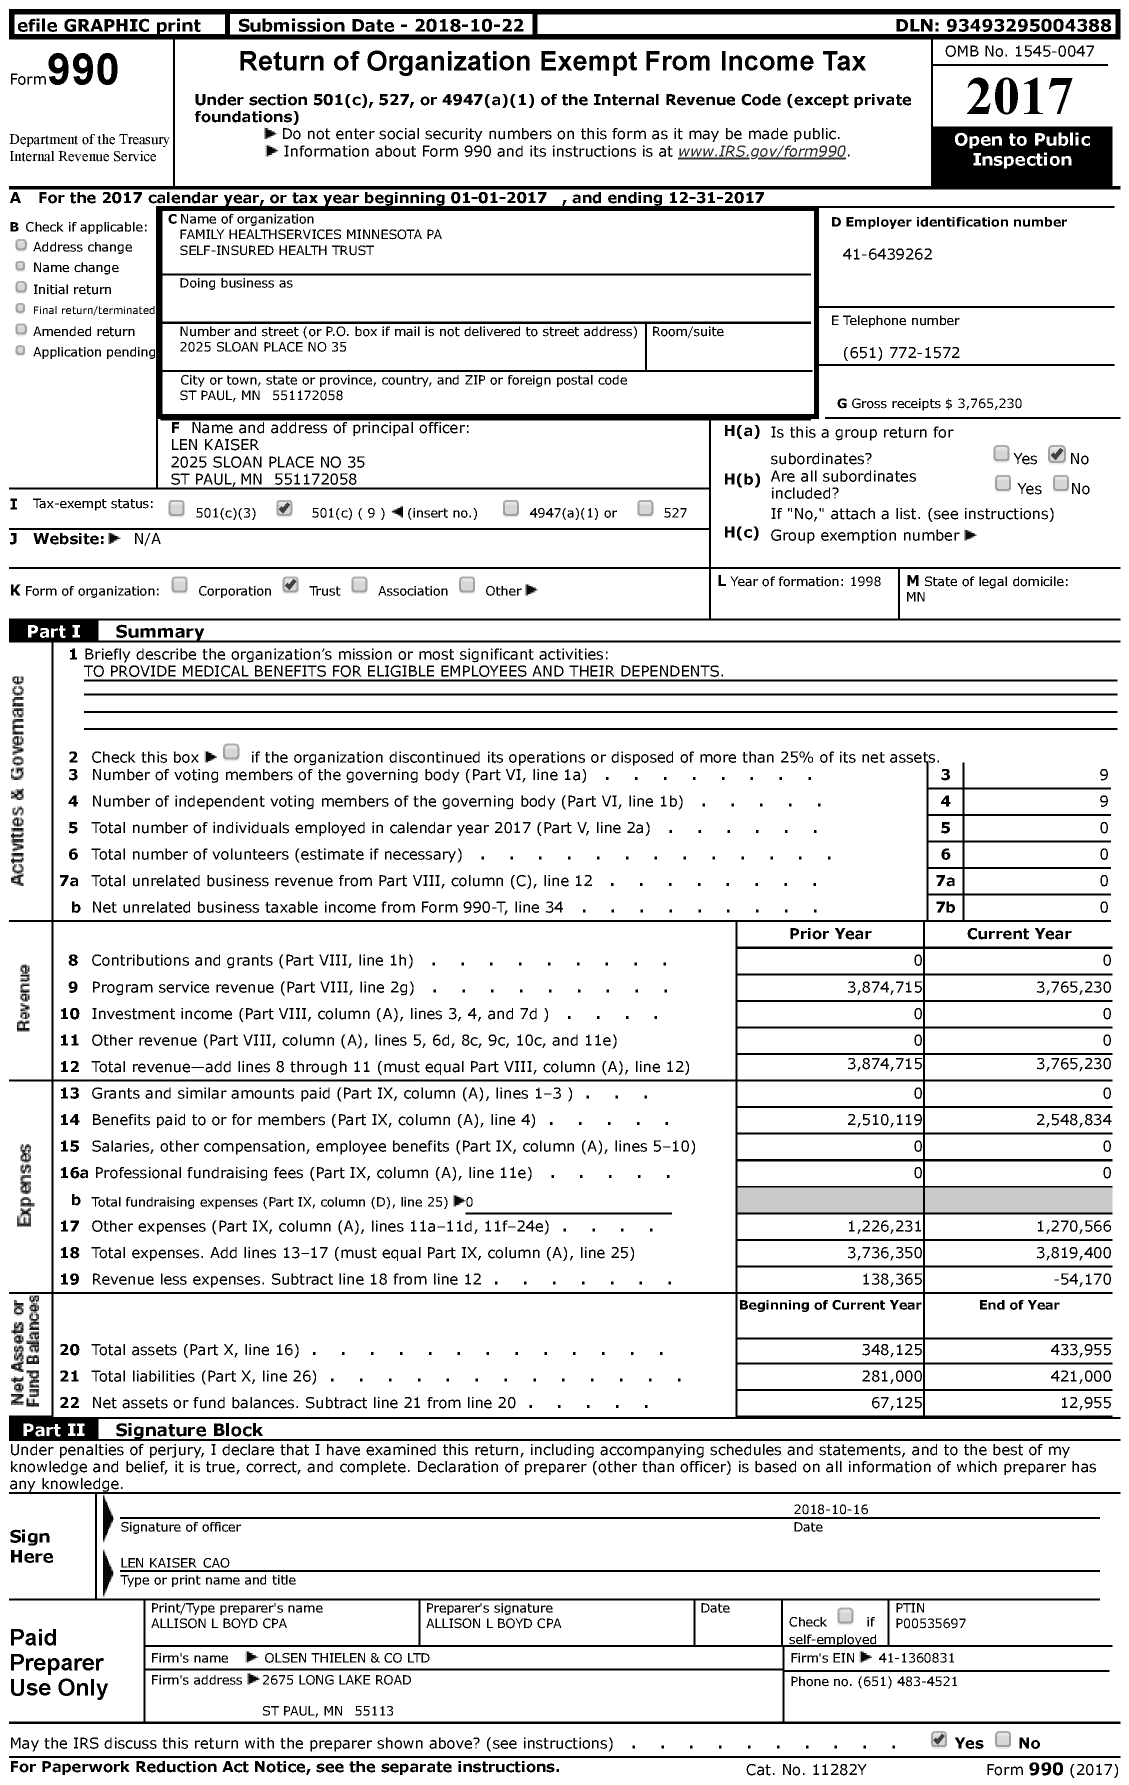 Image of first page of 2017 Form 990 for Family Healthservices Minnesota Pa Self-Insured Health Trust